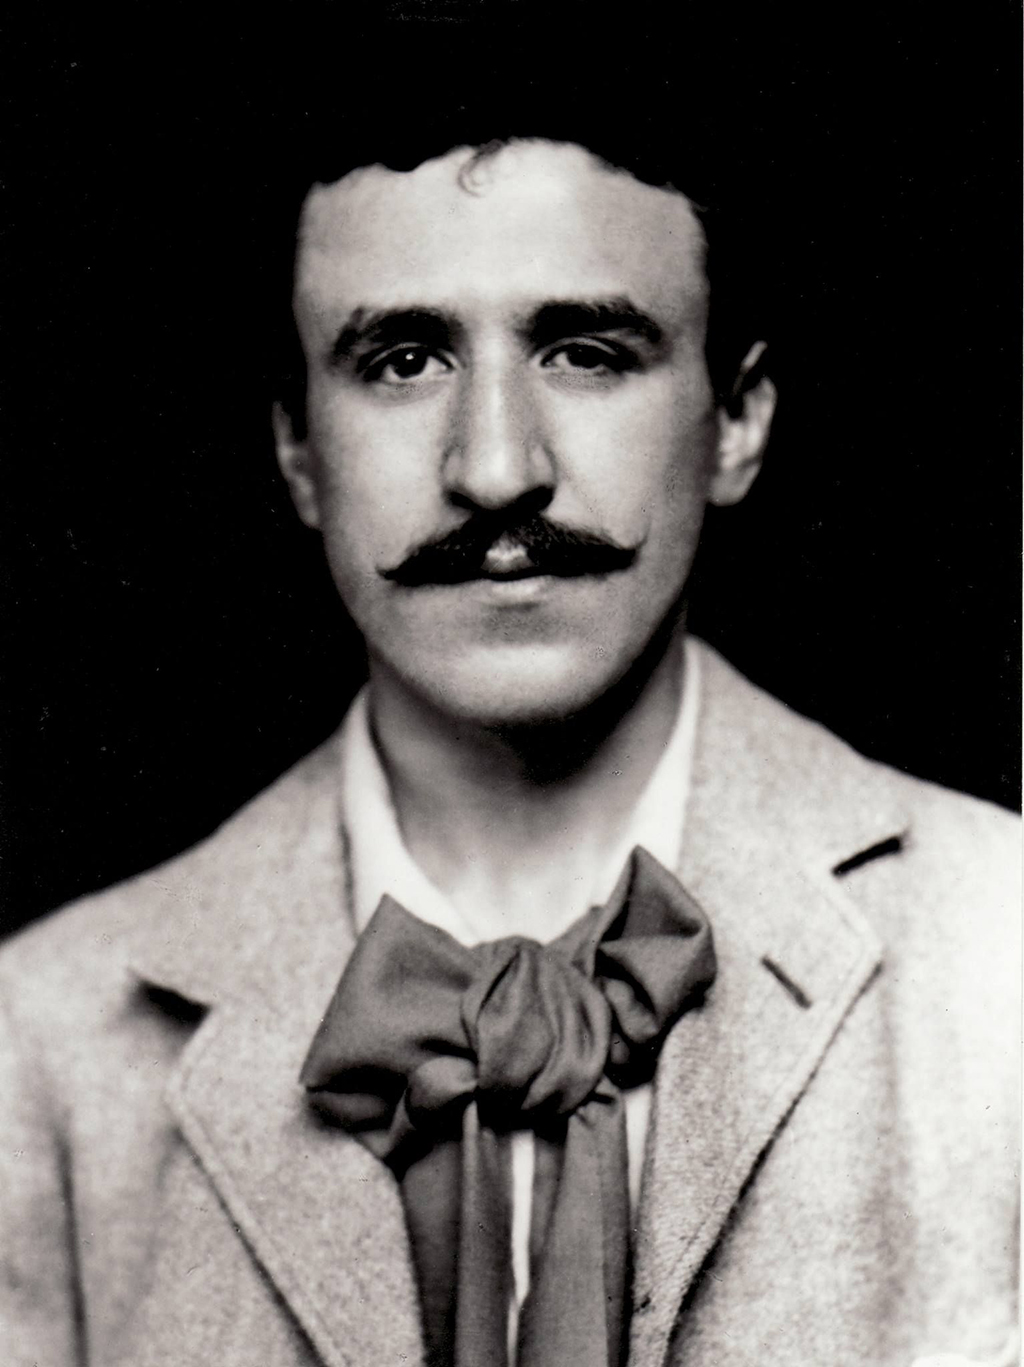 CHARLES-RENNIE-MACKINTOSH-Image-from-annanphotographs.co_.uk_-1